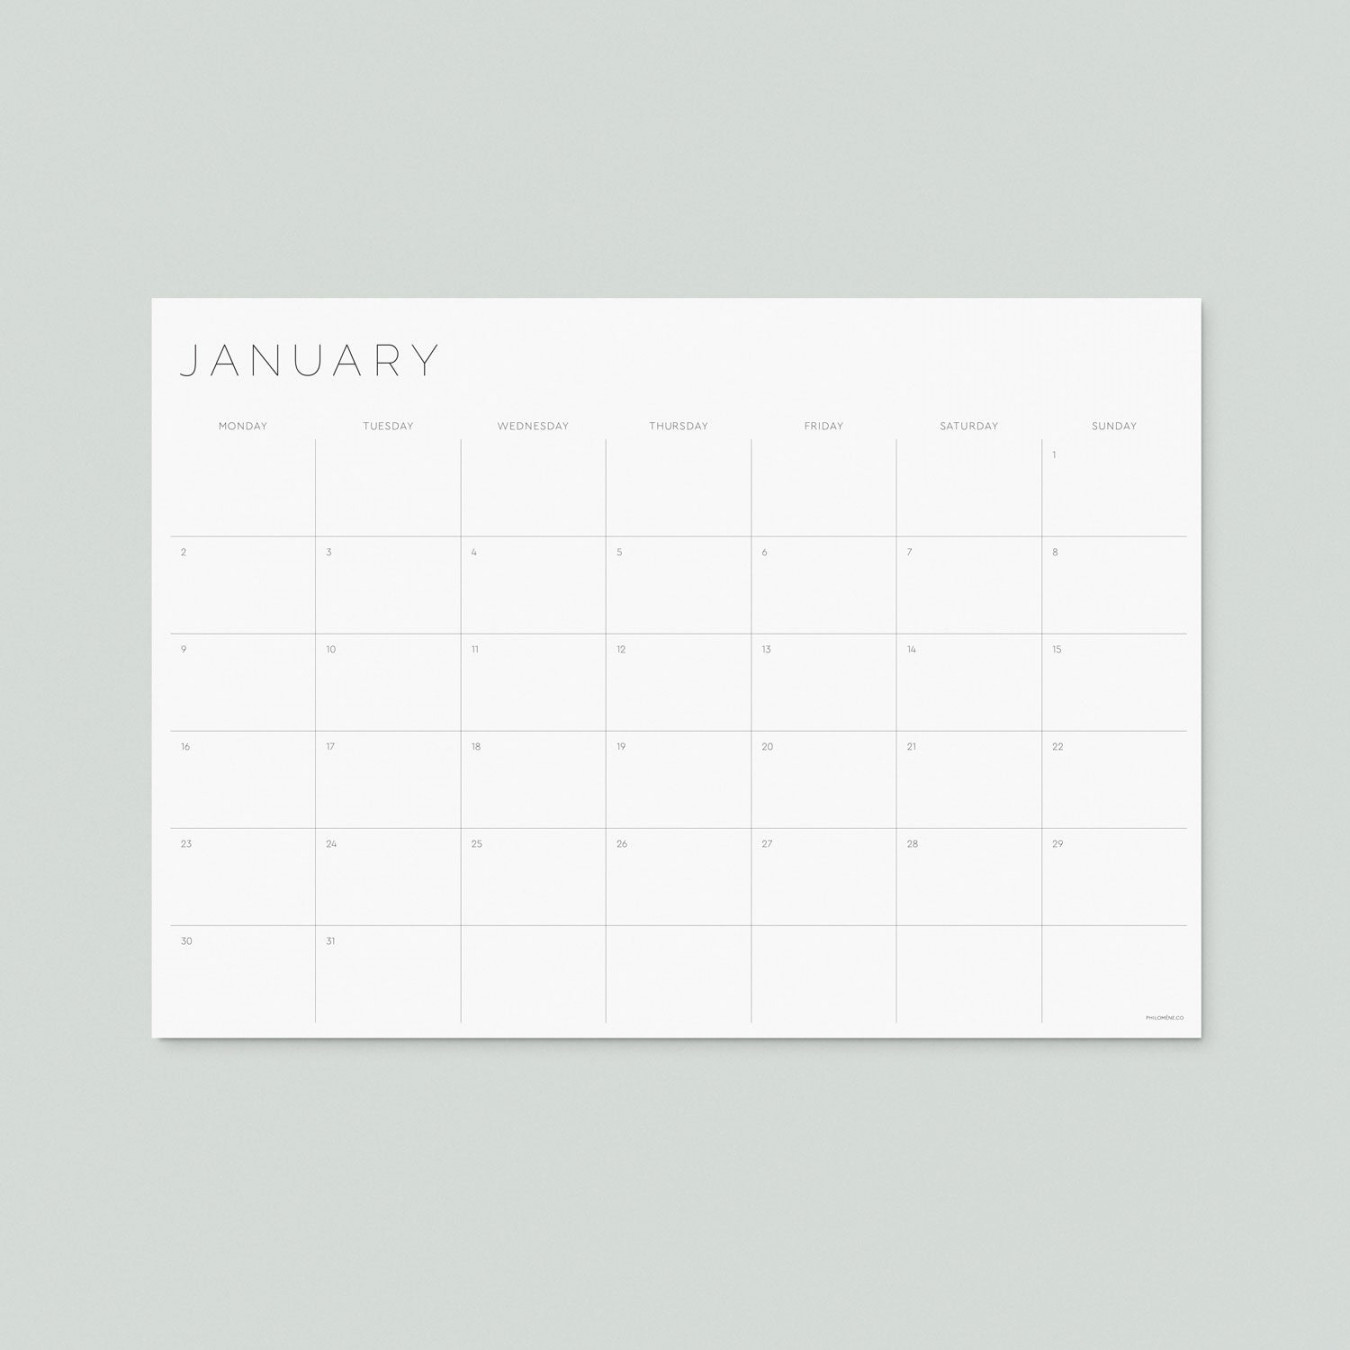 Monthly Planner Printable – MONDAY Start